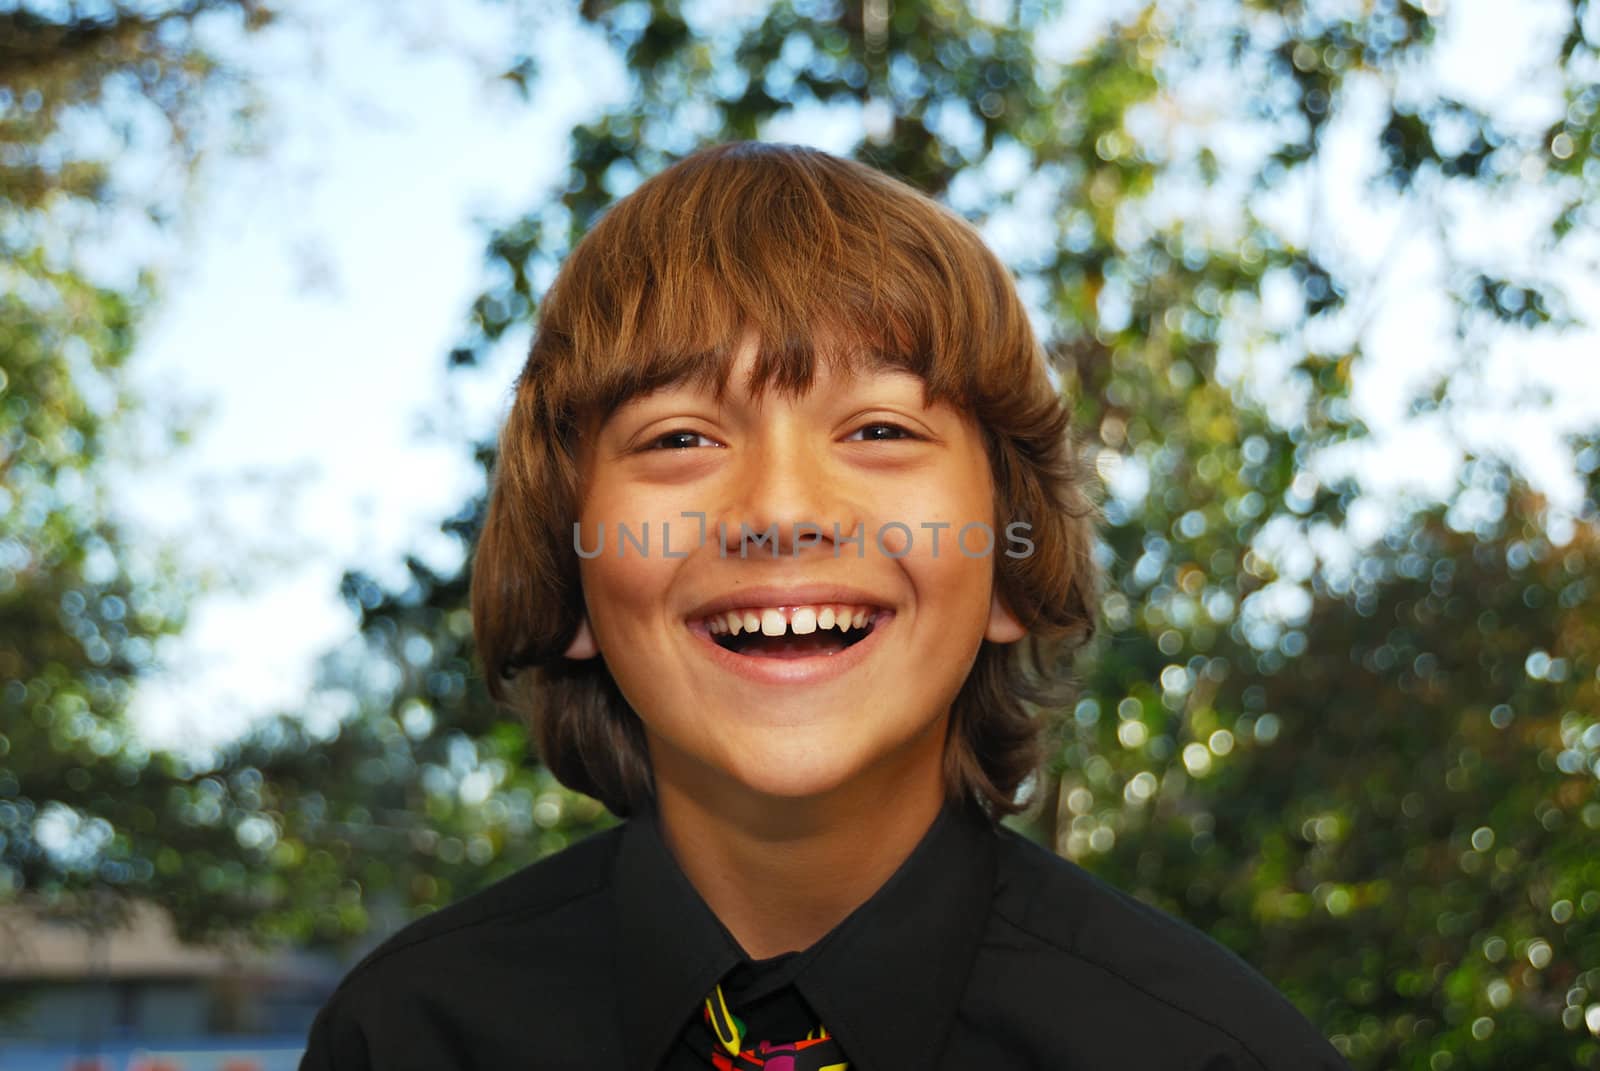 Smiling teenager dressed up in a black shirt and tie.